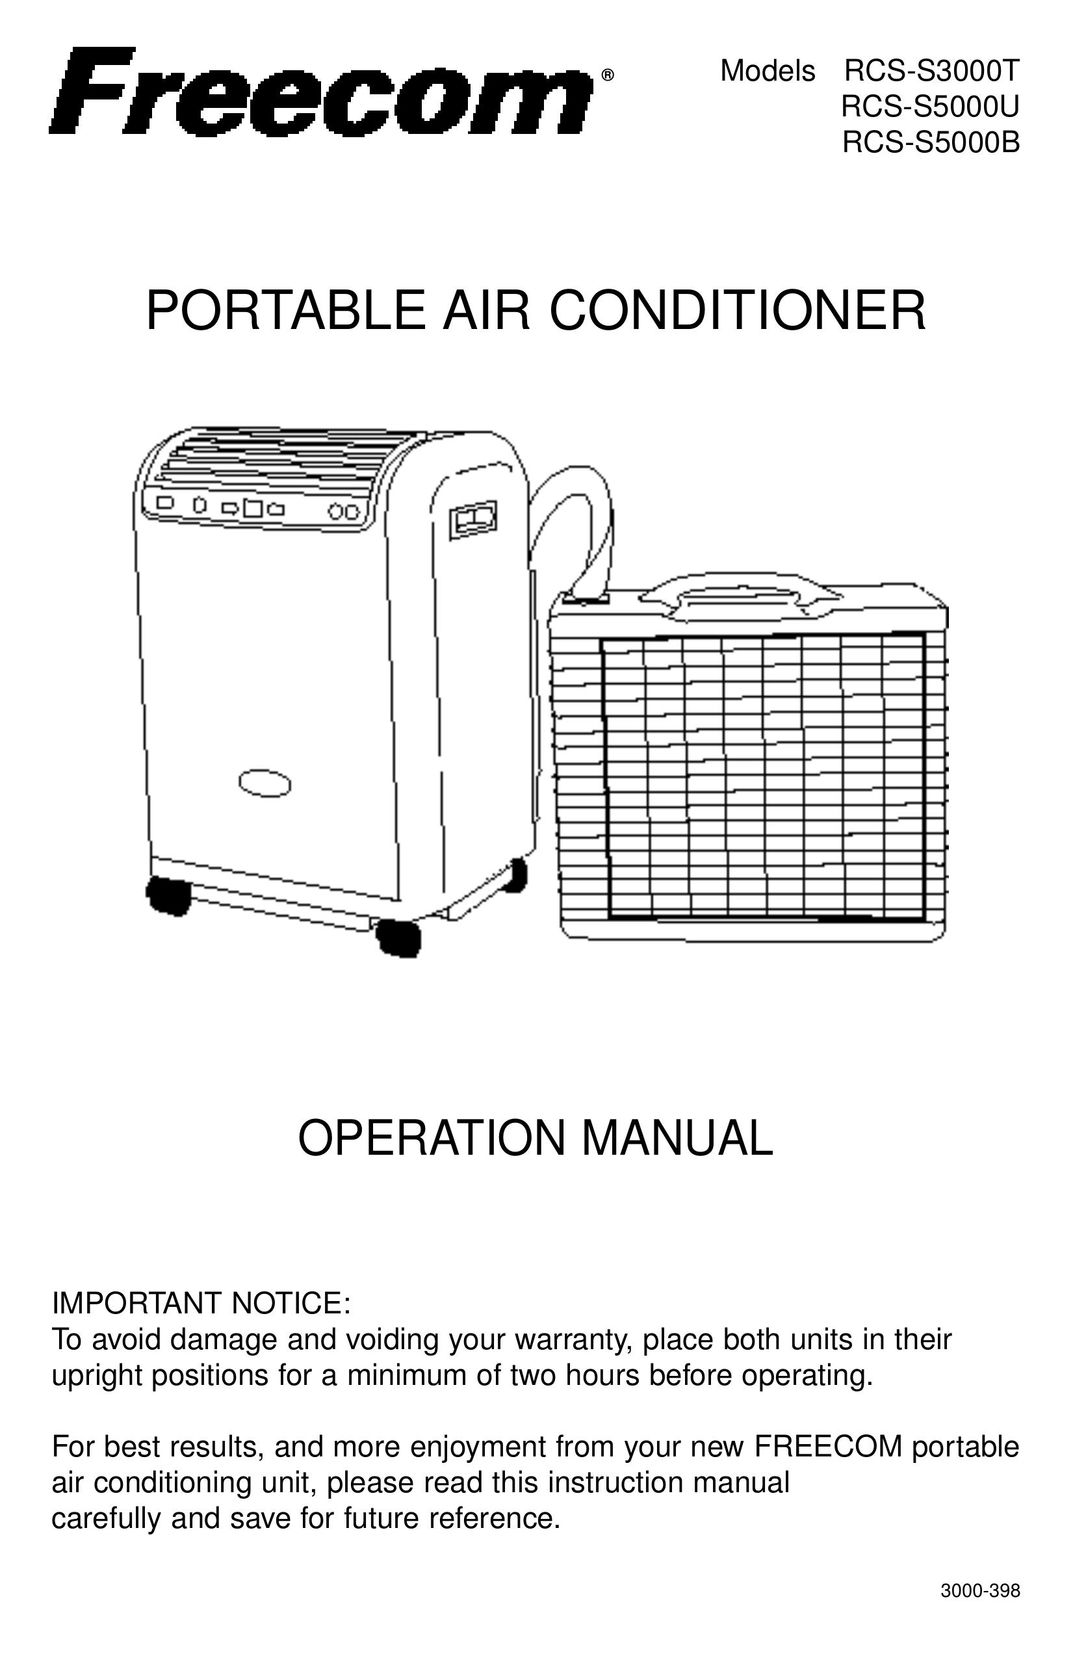 Freecom Technologies RCS-S3000T Air Conditioner User Manual